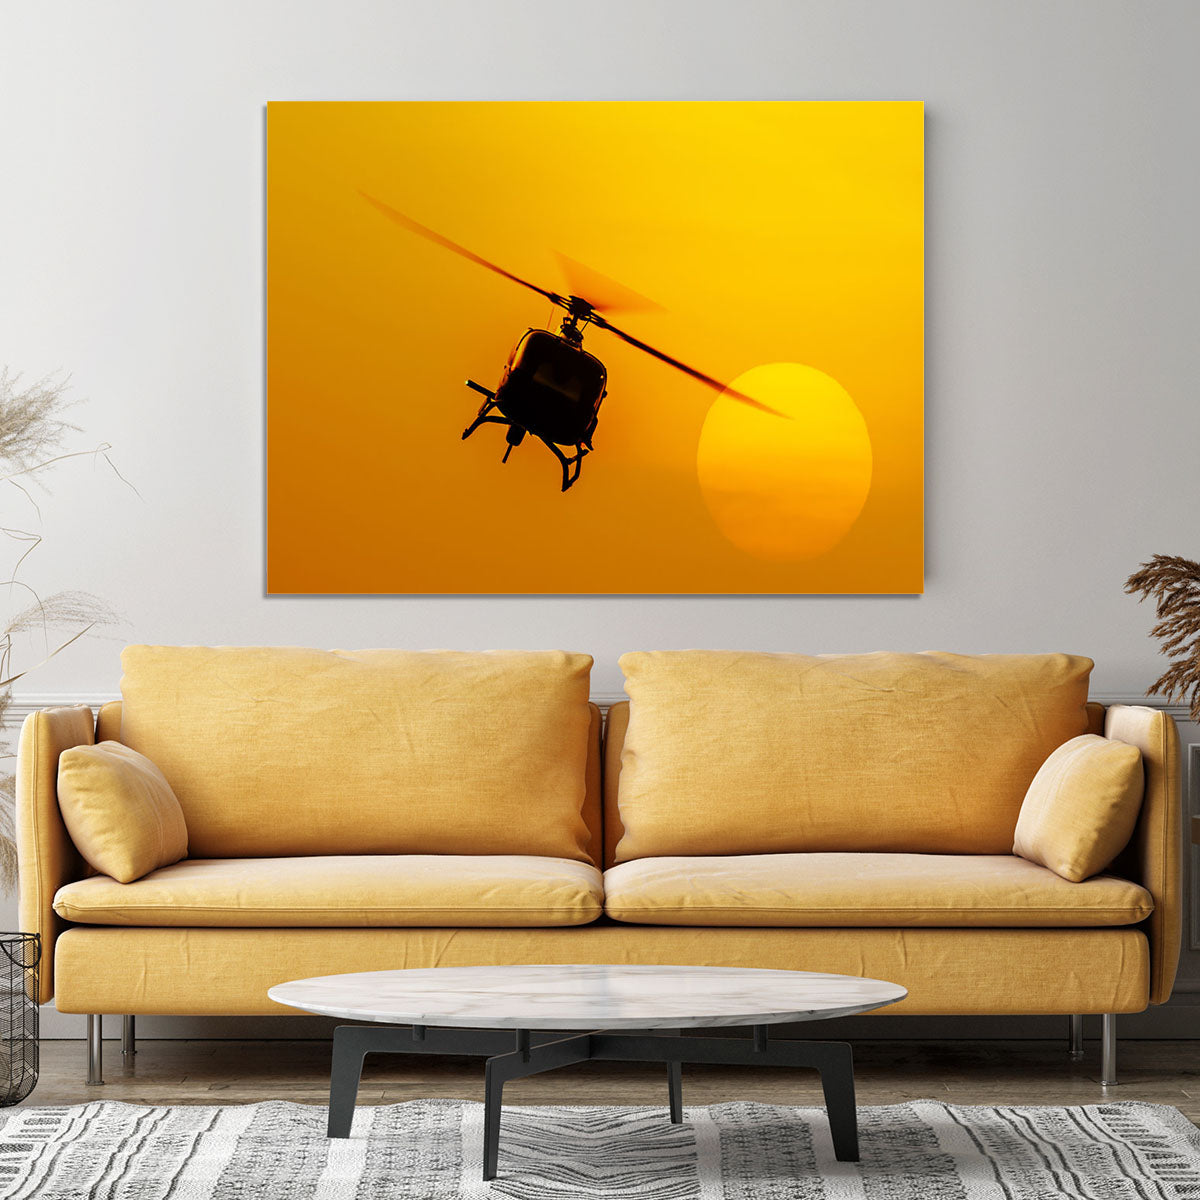 Patrol helicopter flying in sunset Canvas Print or Poster - Canvas Art Rocks - 4